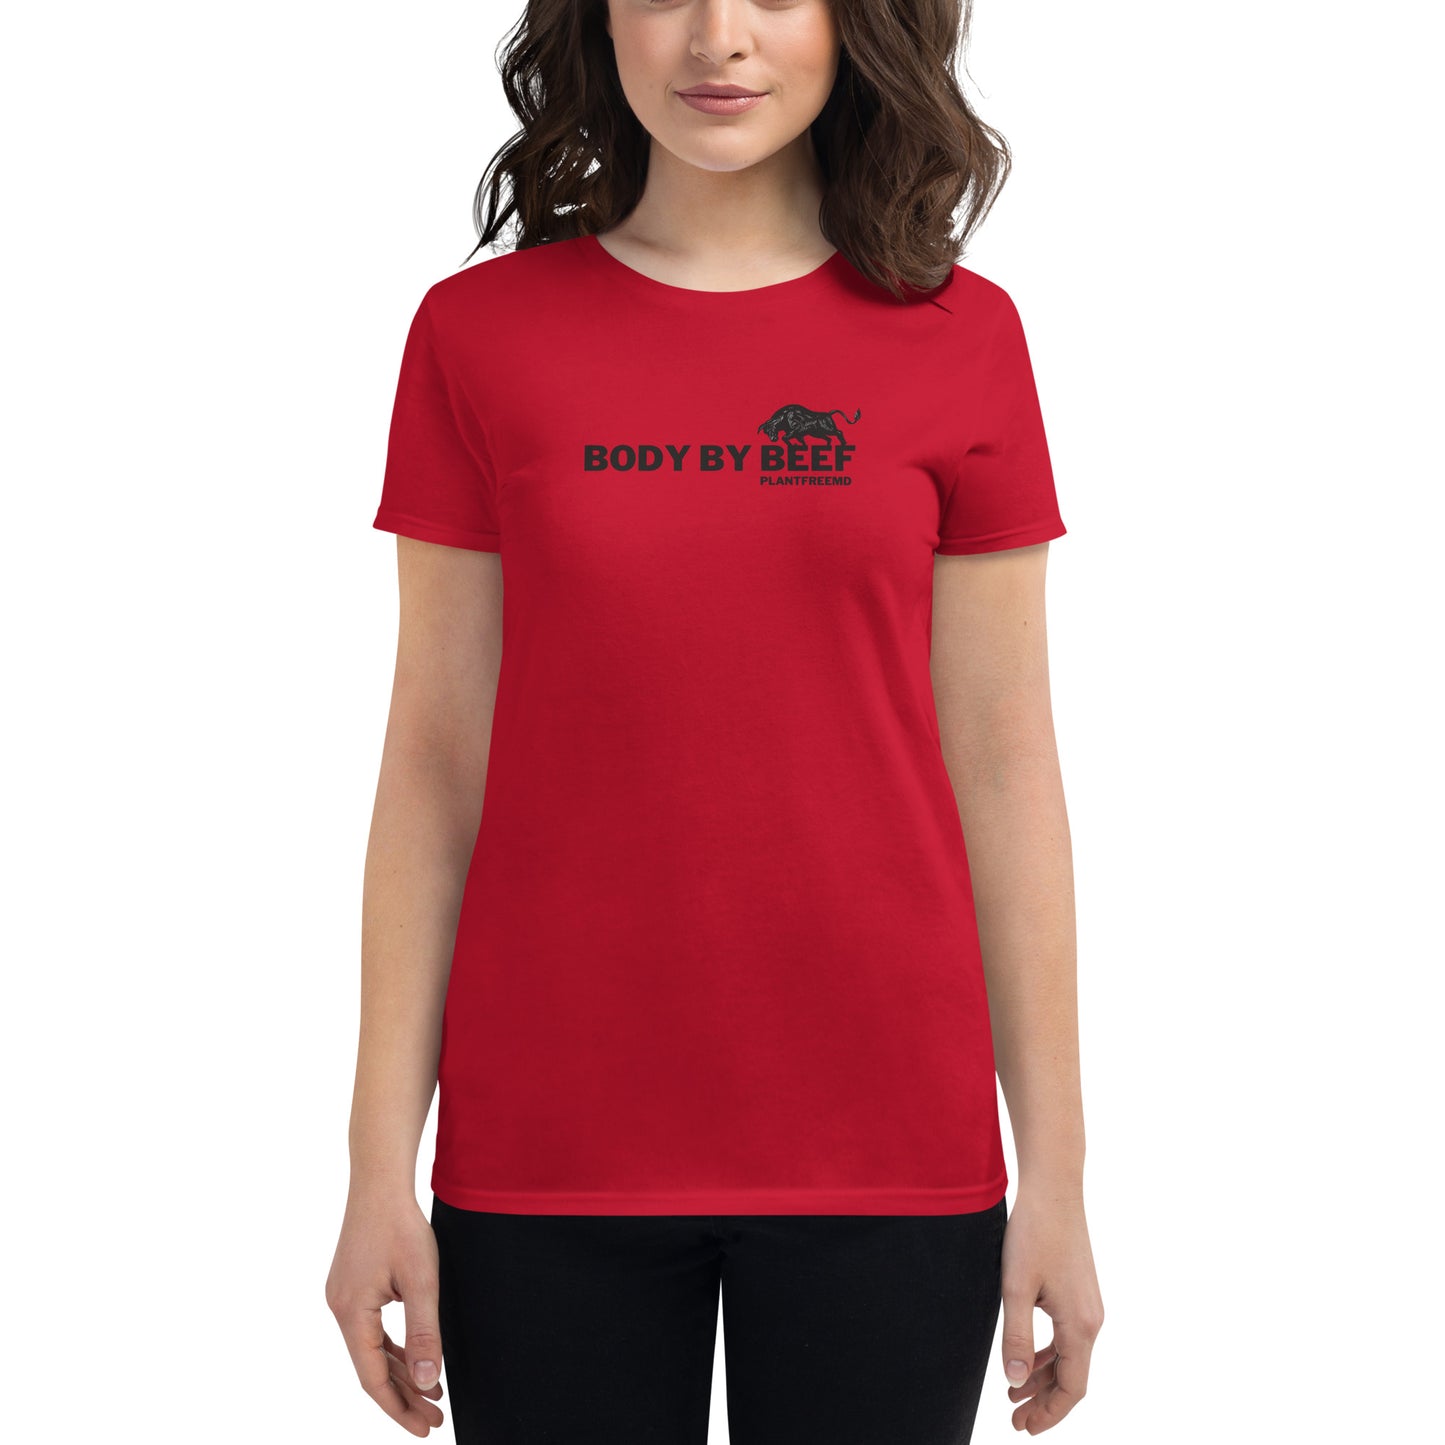 Body By Beef 2 Women's Fitted T-shirt